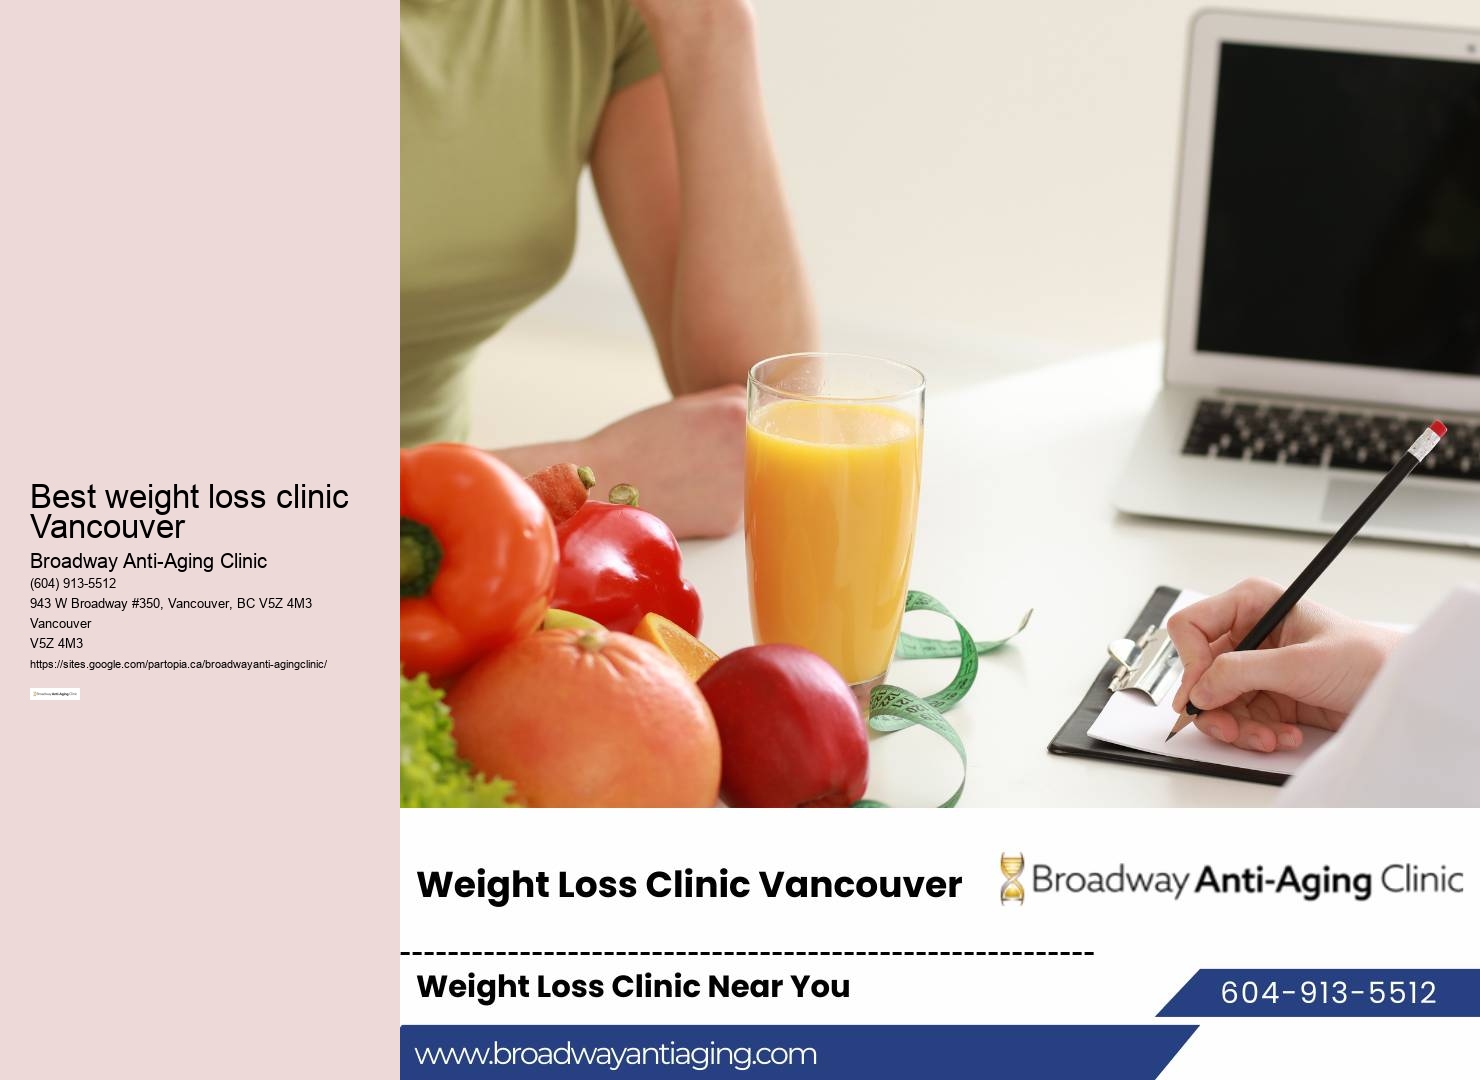 Weight loss clinic North Vancouver nearby